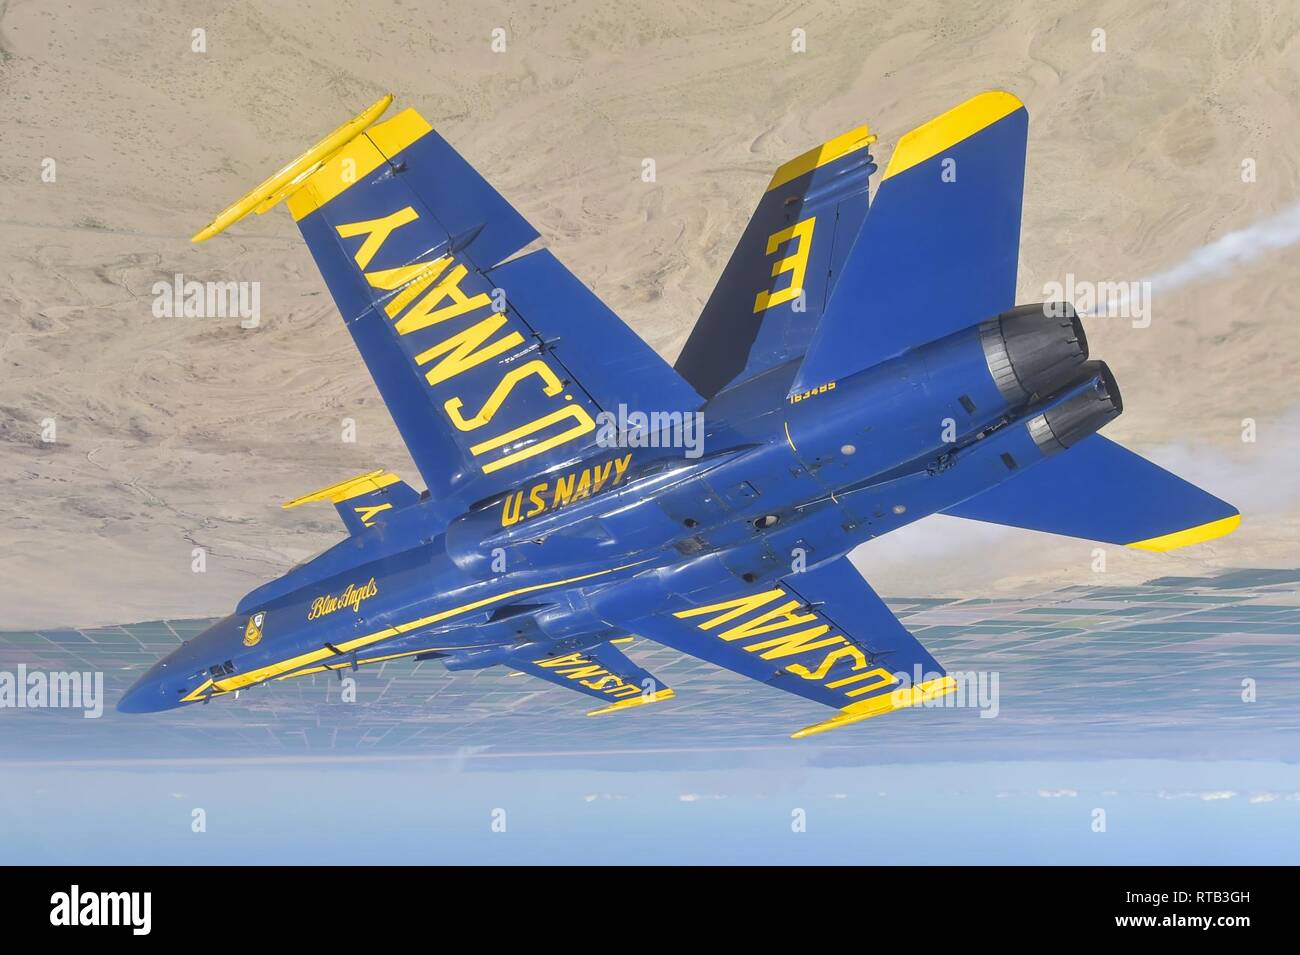 EL CENTRO, Calif. (Feb. 6, 2019) The U.S. Navy Flight Demonstration Squadron, the Blue Angels, diamond pilots perform the diamond 360 maneuver over the Imperial Valley during a training flight. The Blue Angels are conducting winter training at Naval Air Facility El Centro, California, in preparation for the 2019 show season. The team is scheduled to conduct 61 flight demonstrations at 32 locations across the country to showcase the pride and professionalism of the U.S. Navy and Marine Corps to the American public. Stock Photo